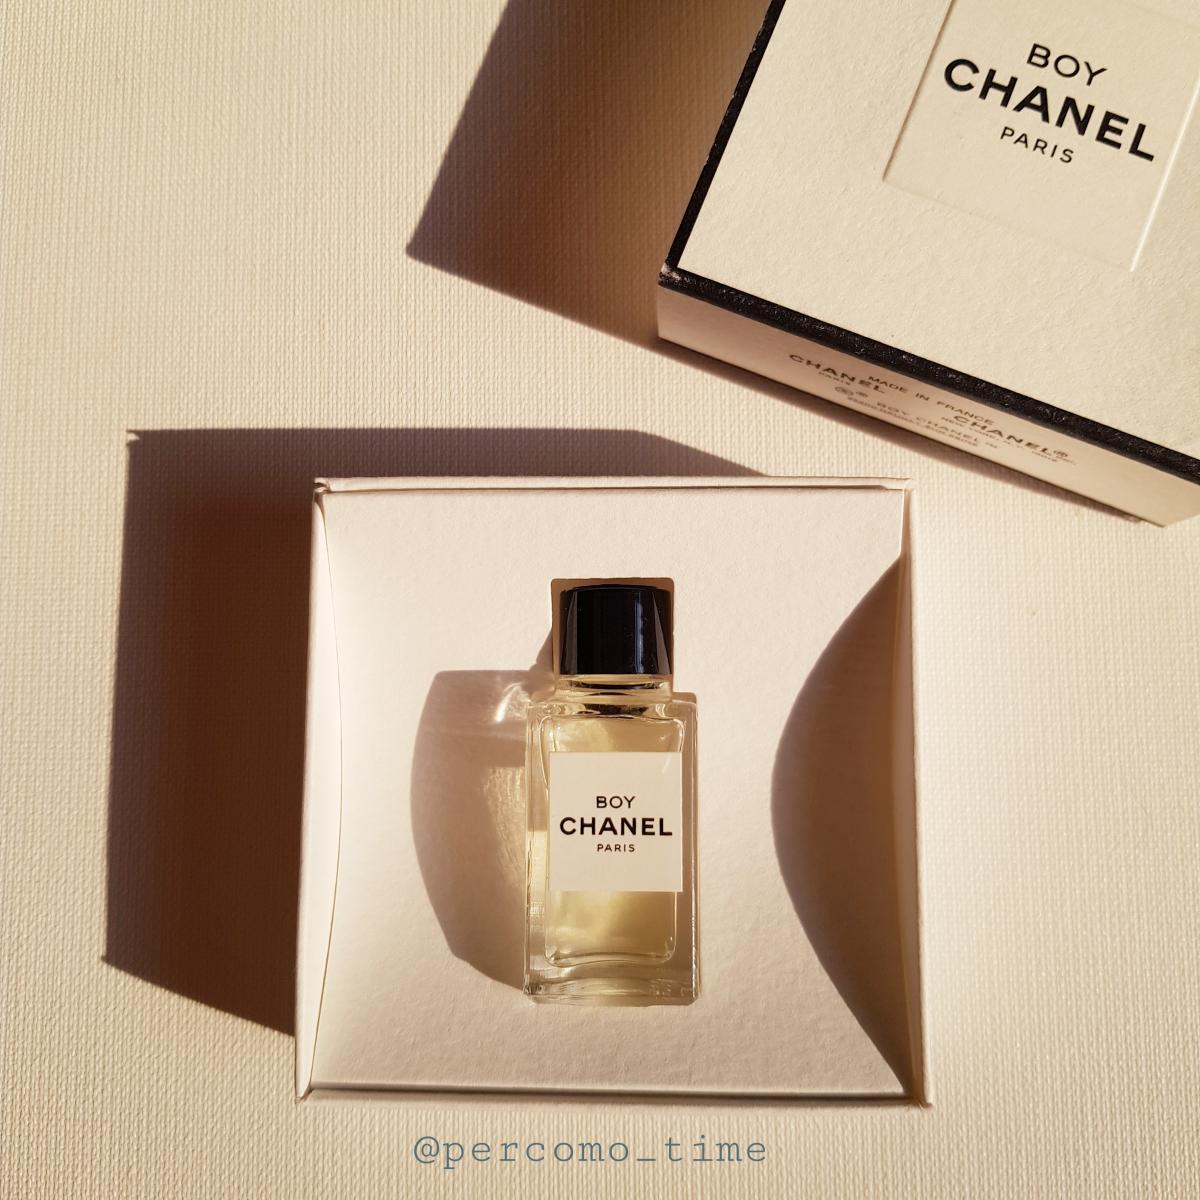 Boy Chanel Chanel perfume - a fragrance for women and men 2016